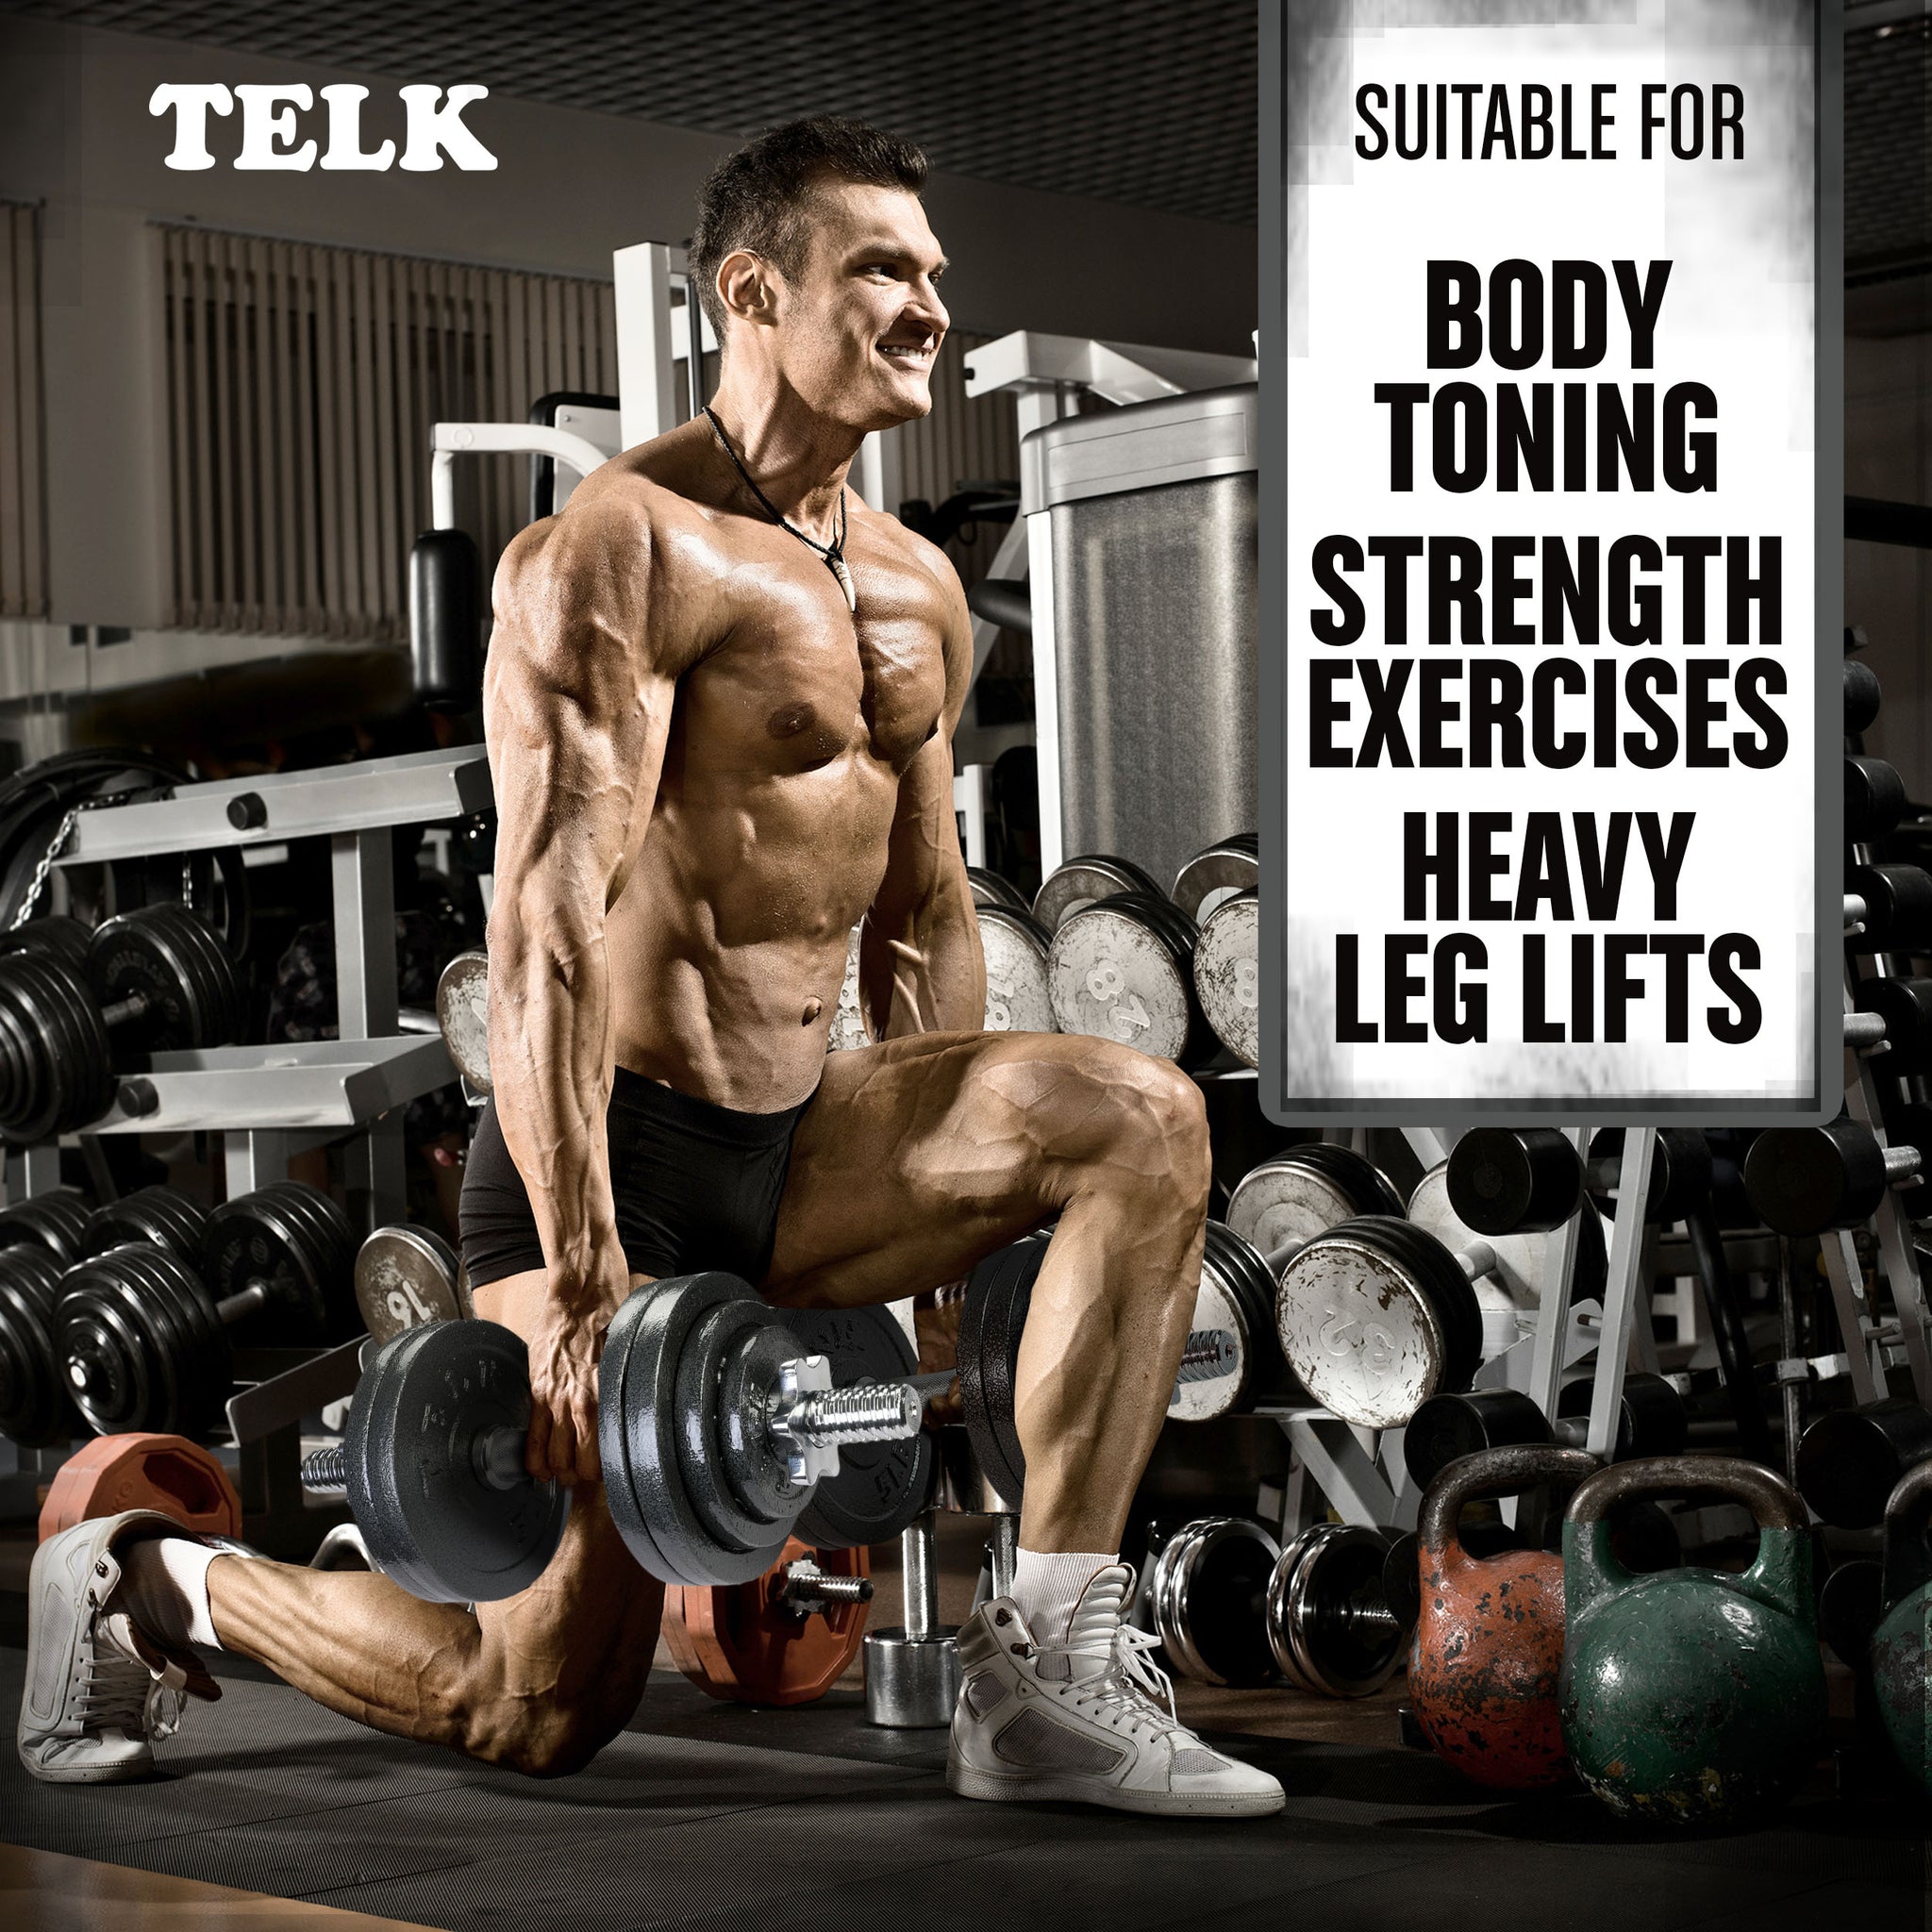 Adjustable Dumbbells 105lbs - Telk 2 dumbbell5 ibs exceptional quality